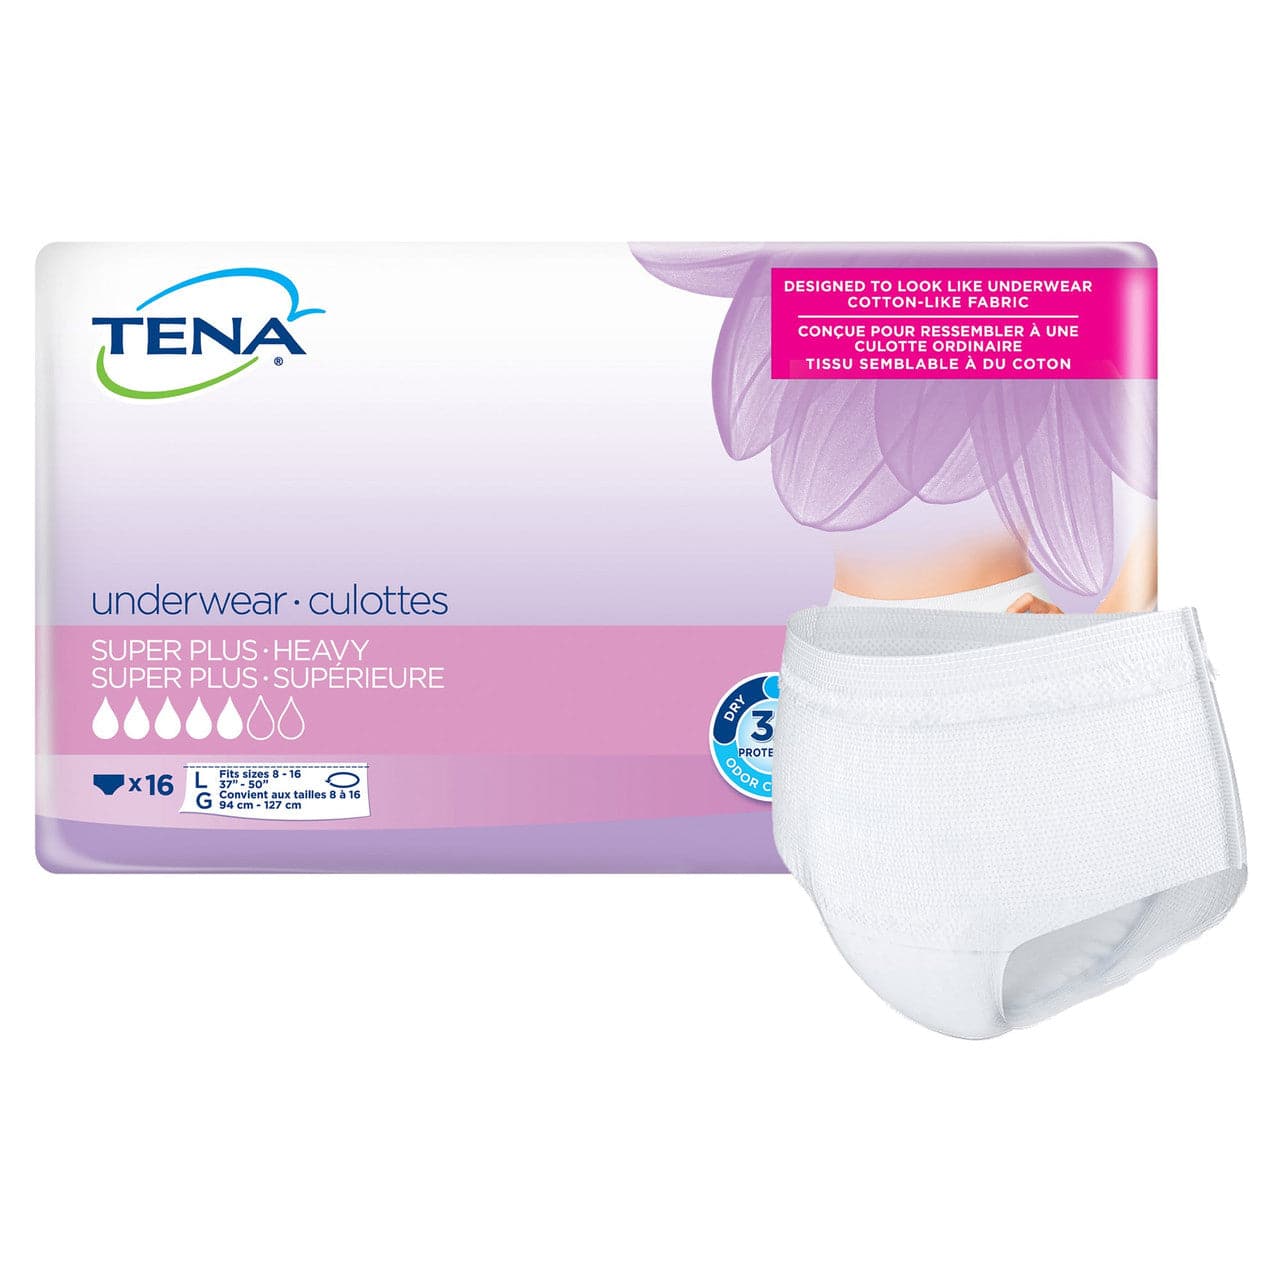 Tena Female Adult Absorbent Underwear, Count of 20 (Pack of 2)